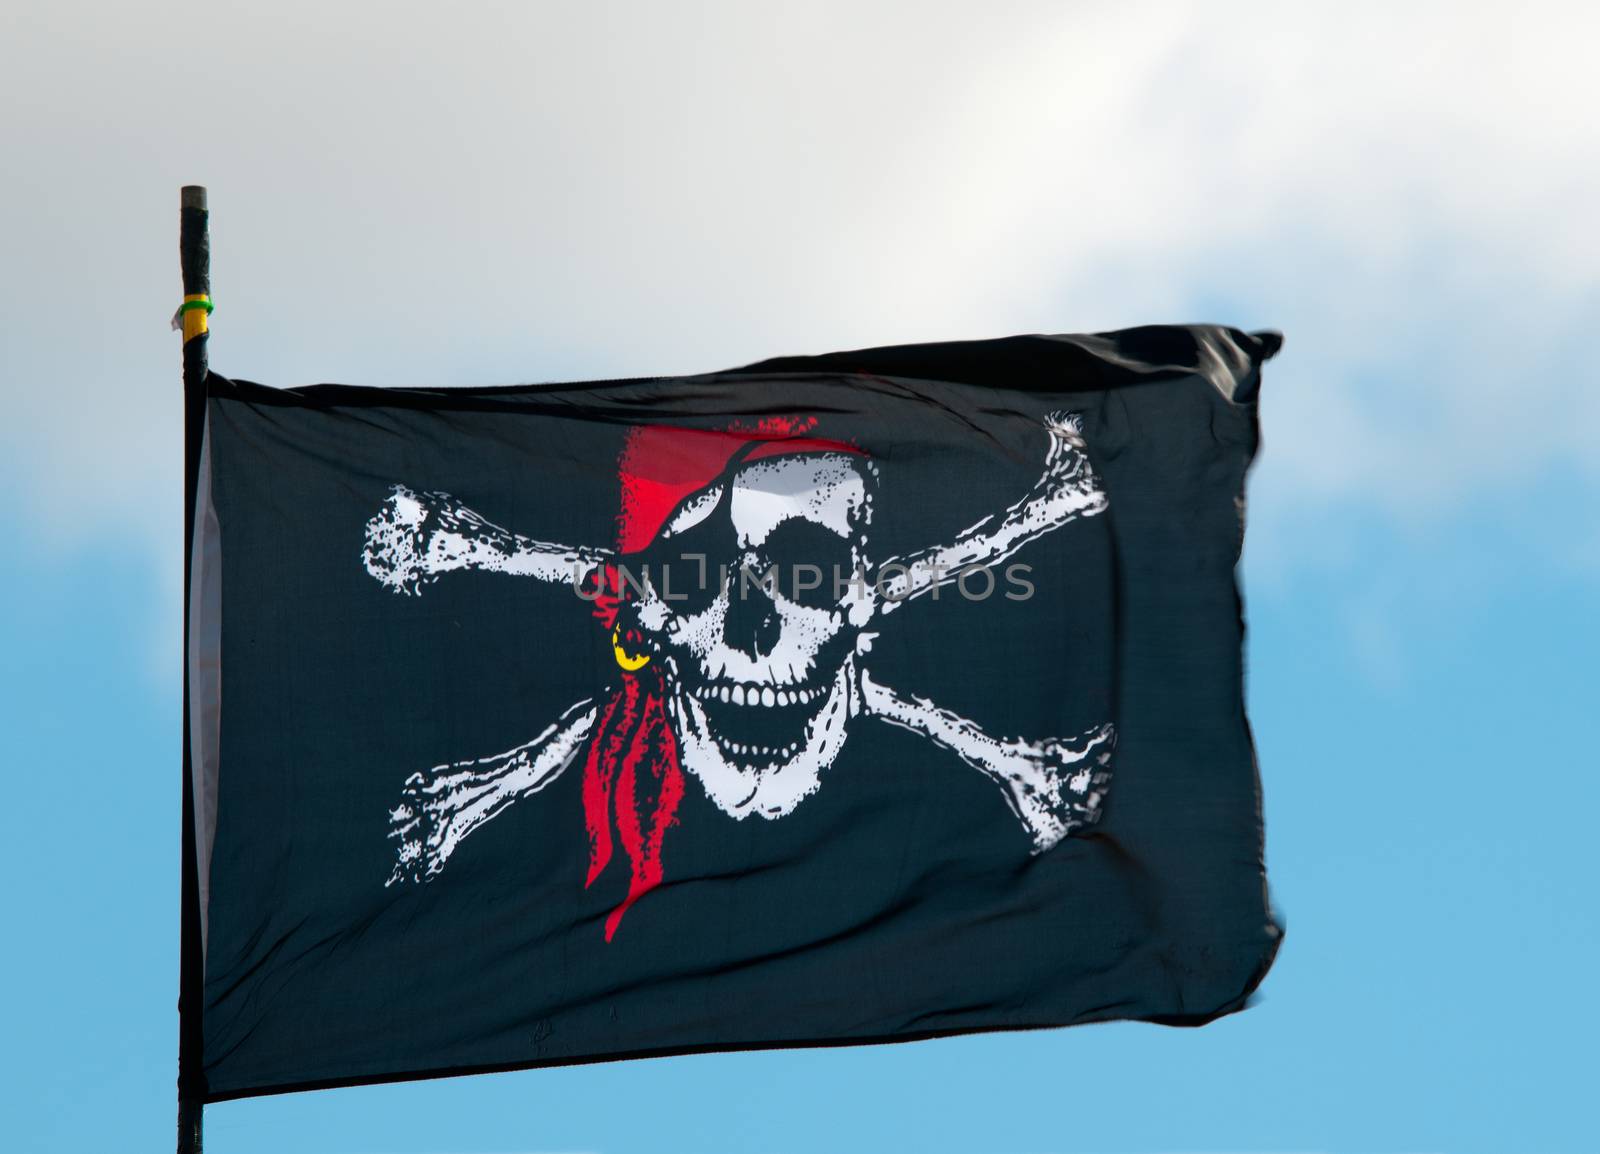 Pirate Flag Flying in Wind